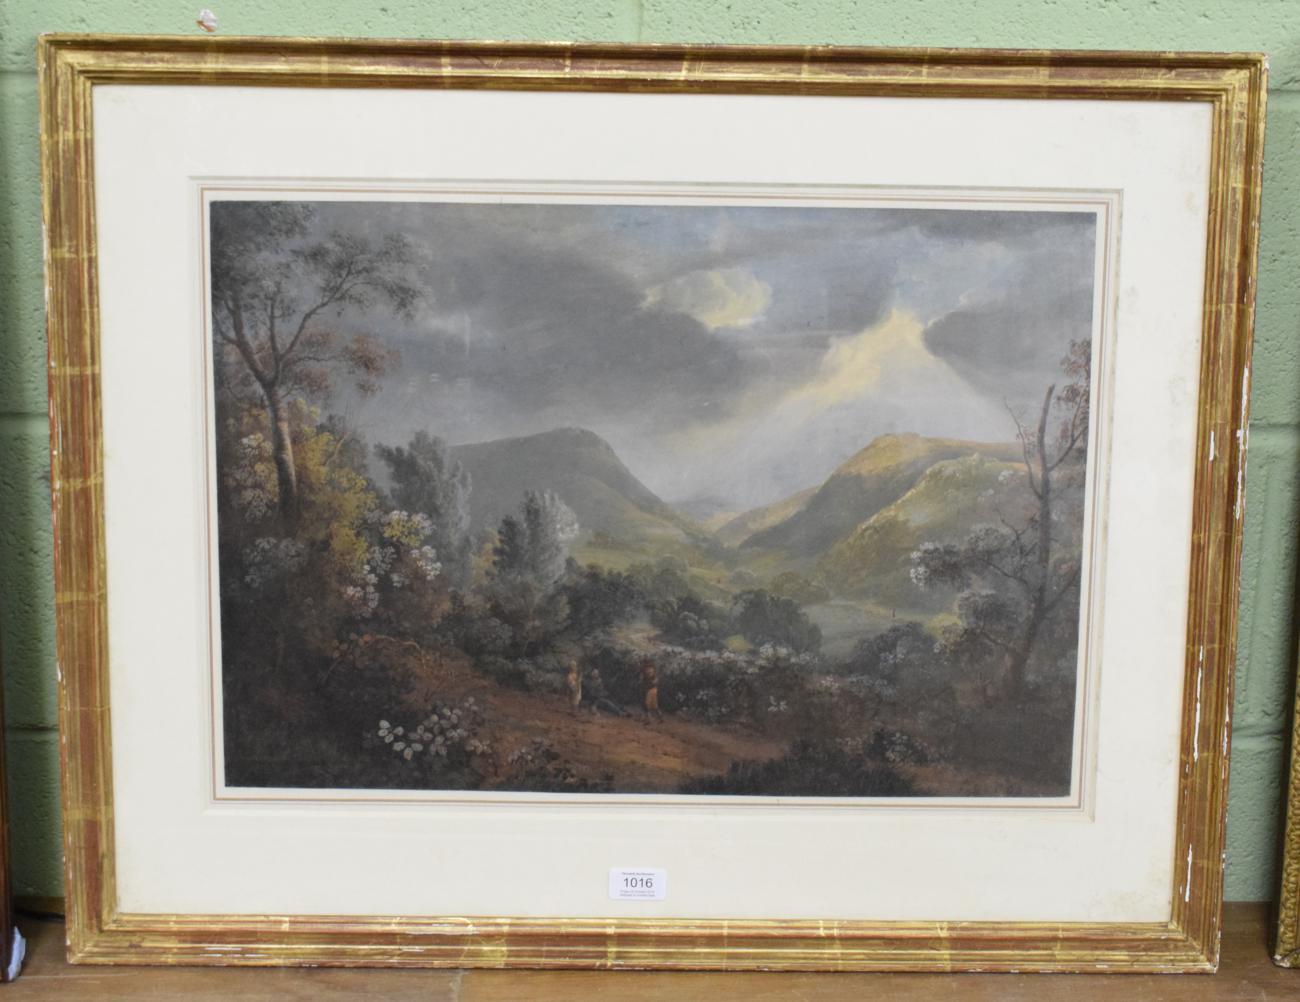 Lot 1016 - Attributed to John Inigo Richards, A view in the Lake District, gouache